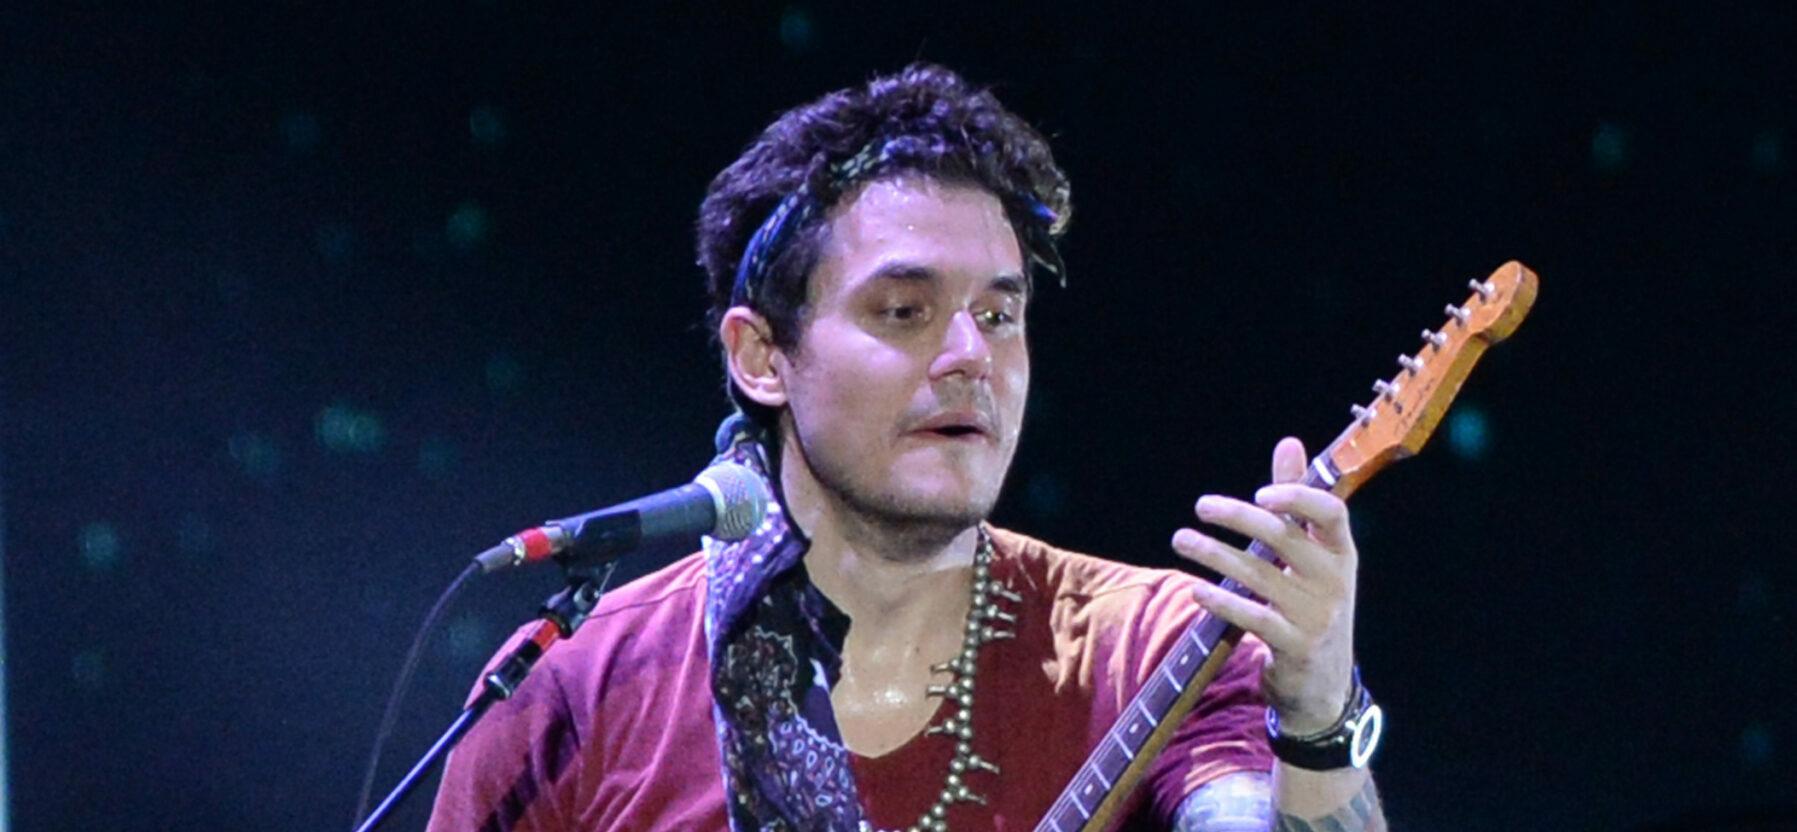 John Mayer performs Born and Raised World Tour 2013 with Katy Perry watching from backstage in West Palm Beach